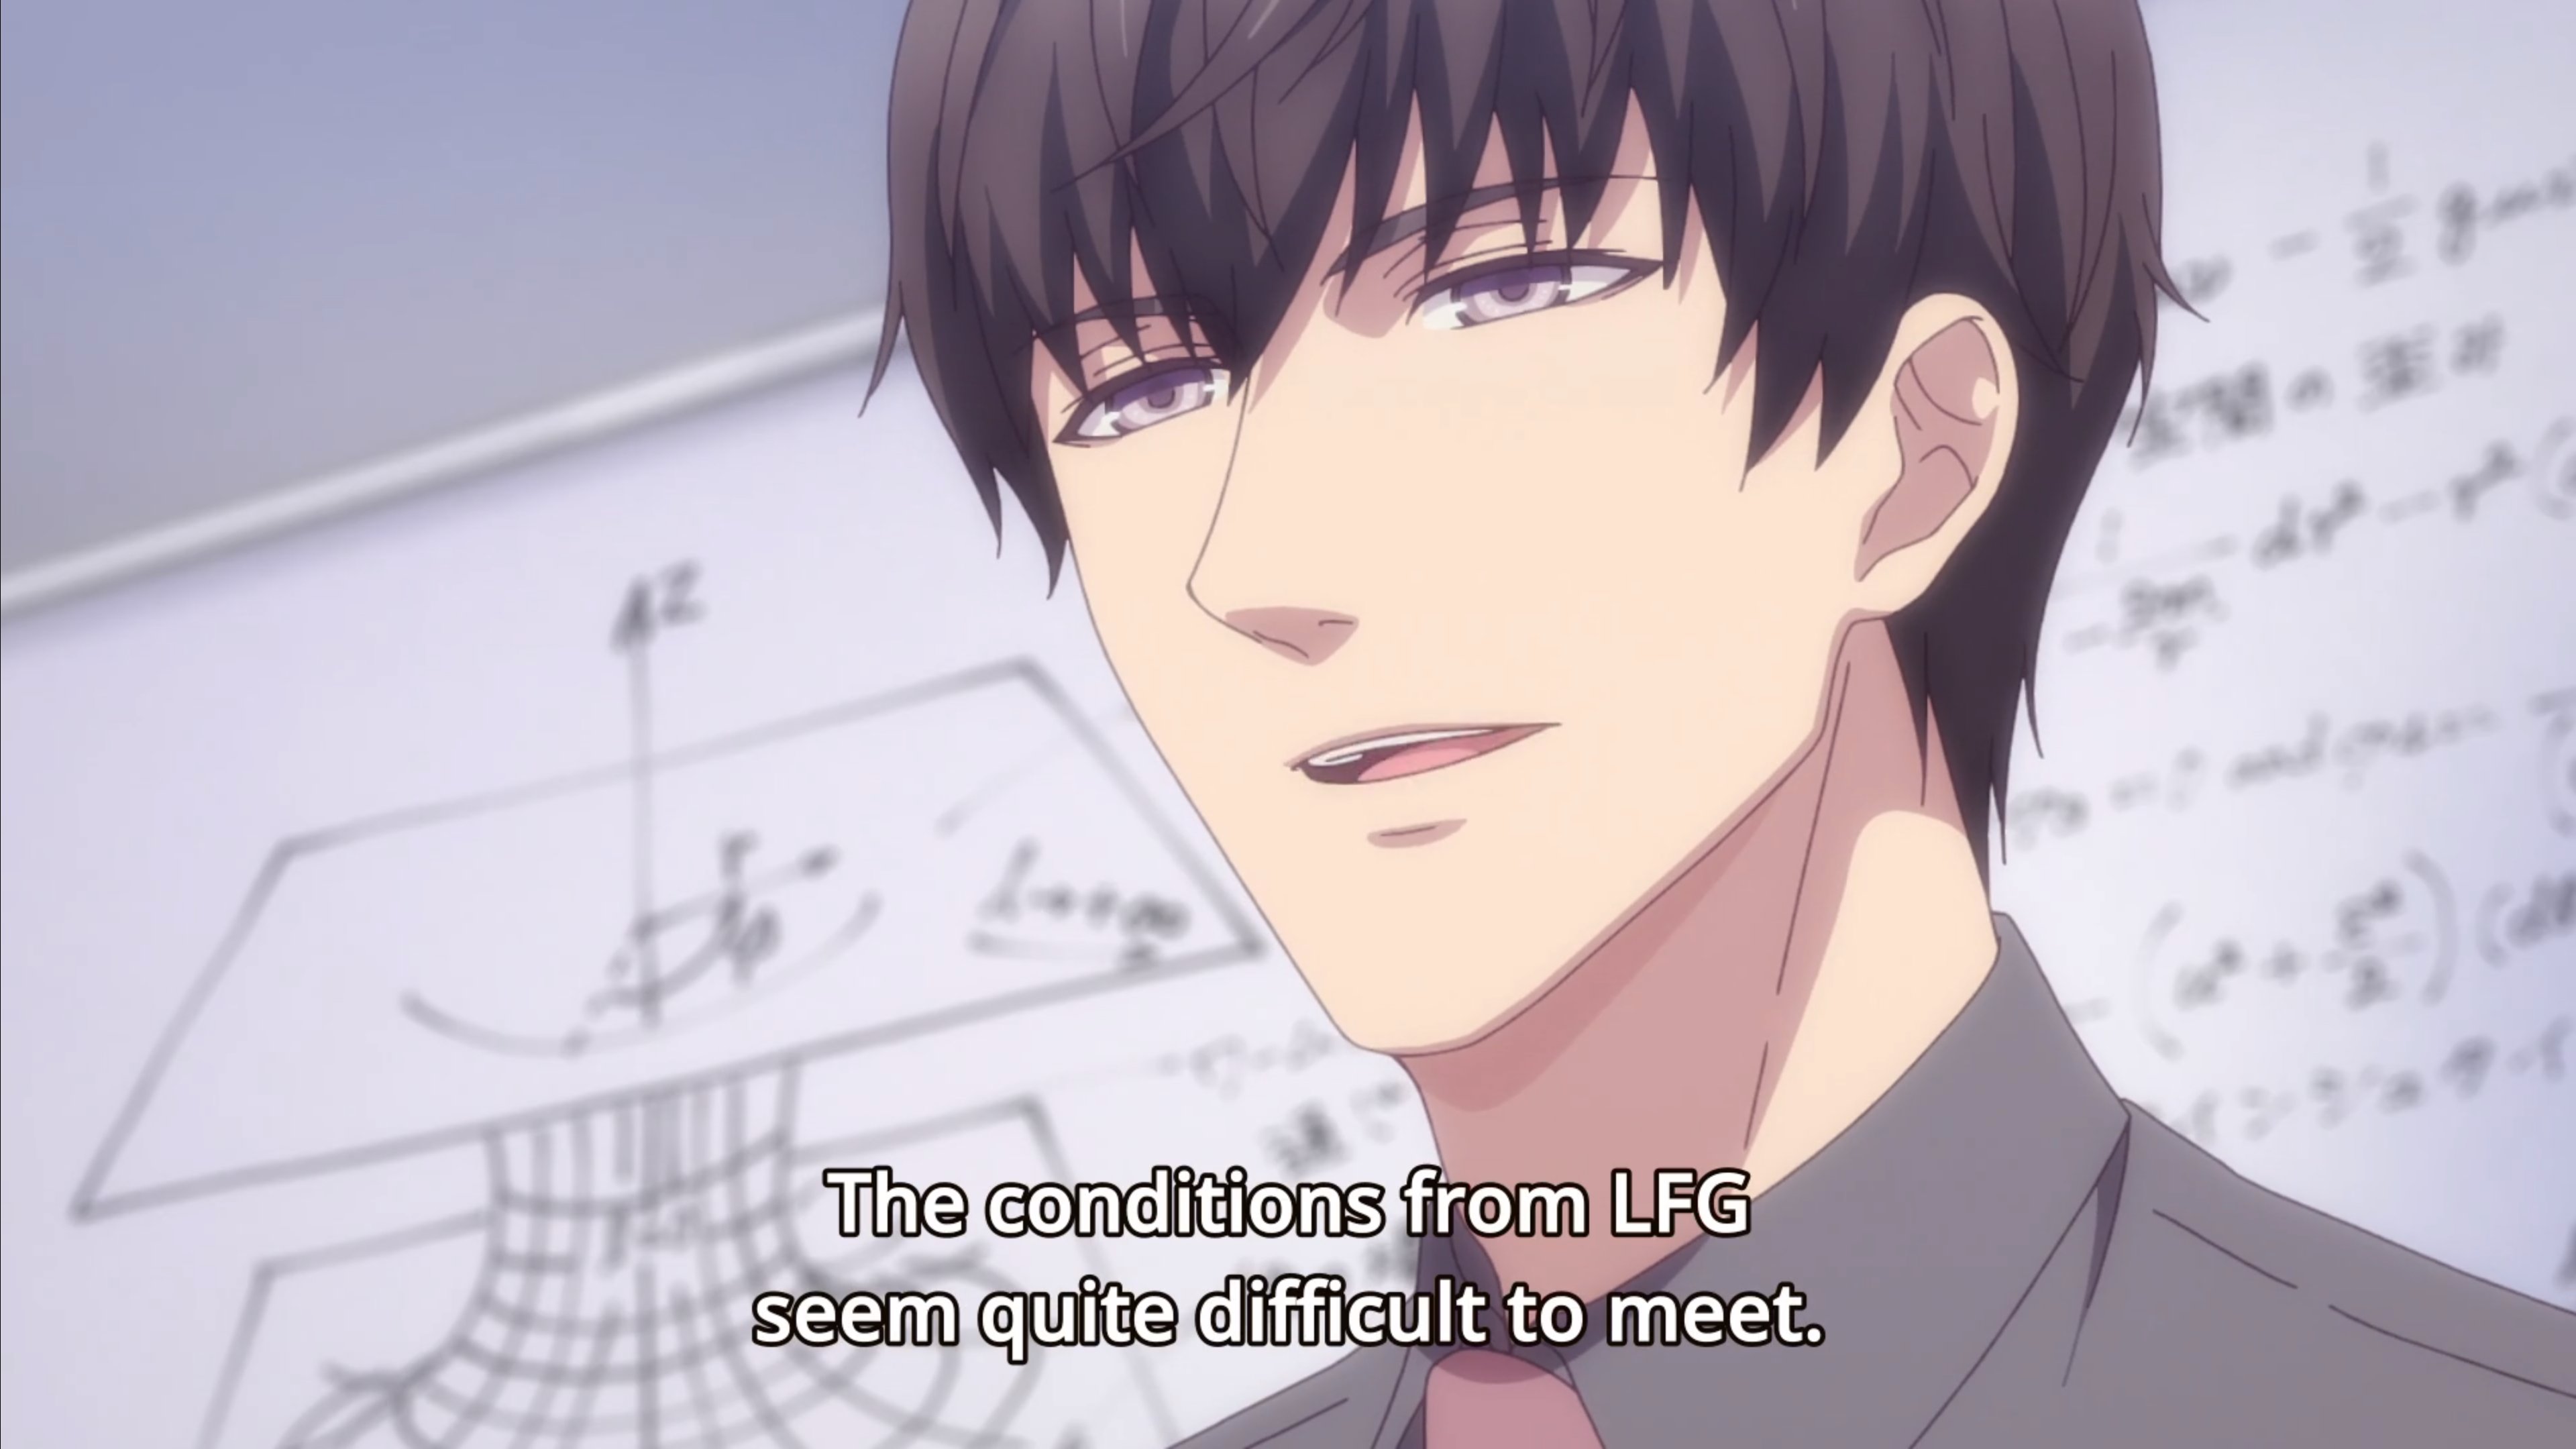 Koi to Producer: EVOL×LOVE Episode 6 Review Lucien telling lies